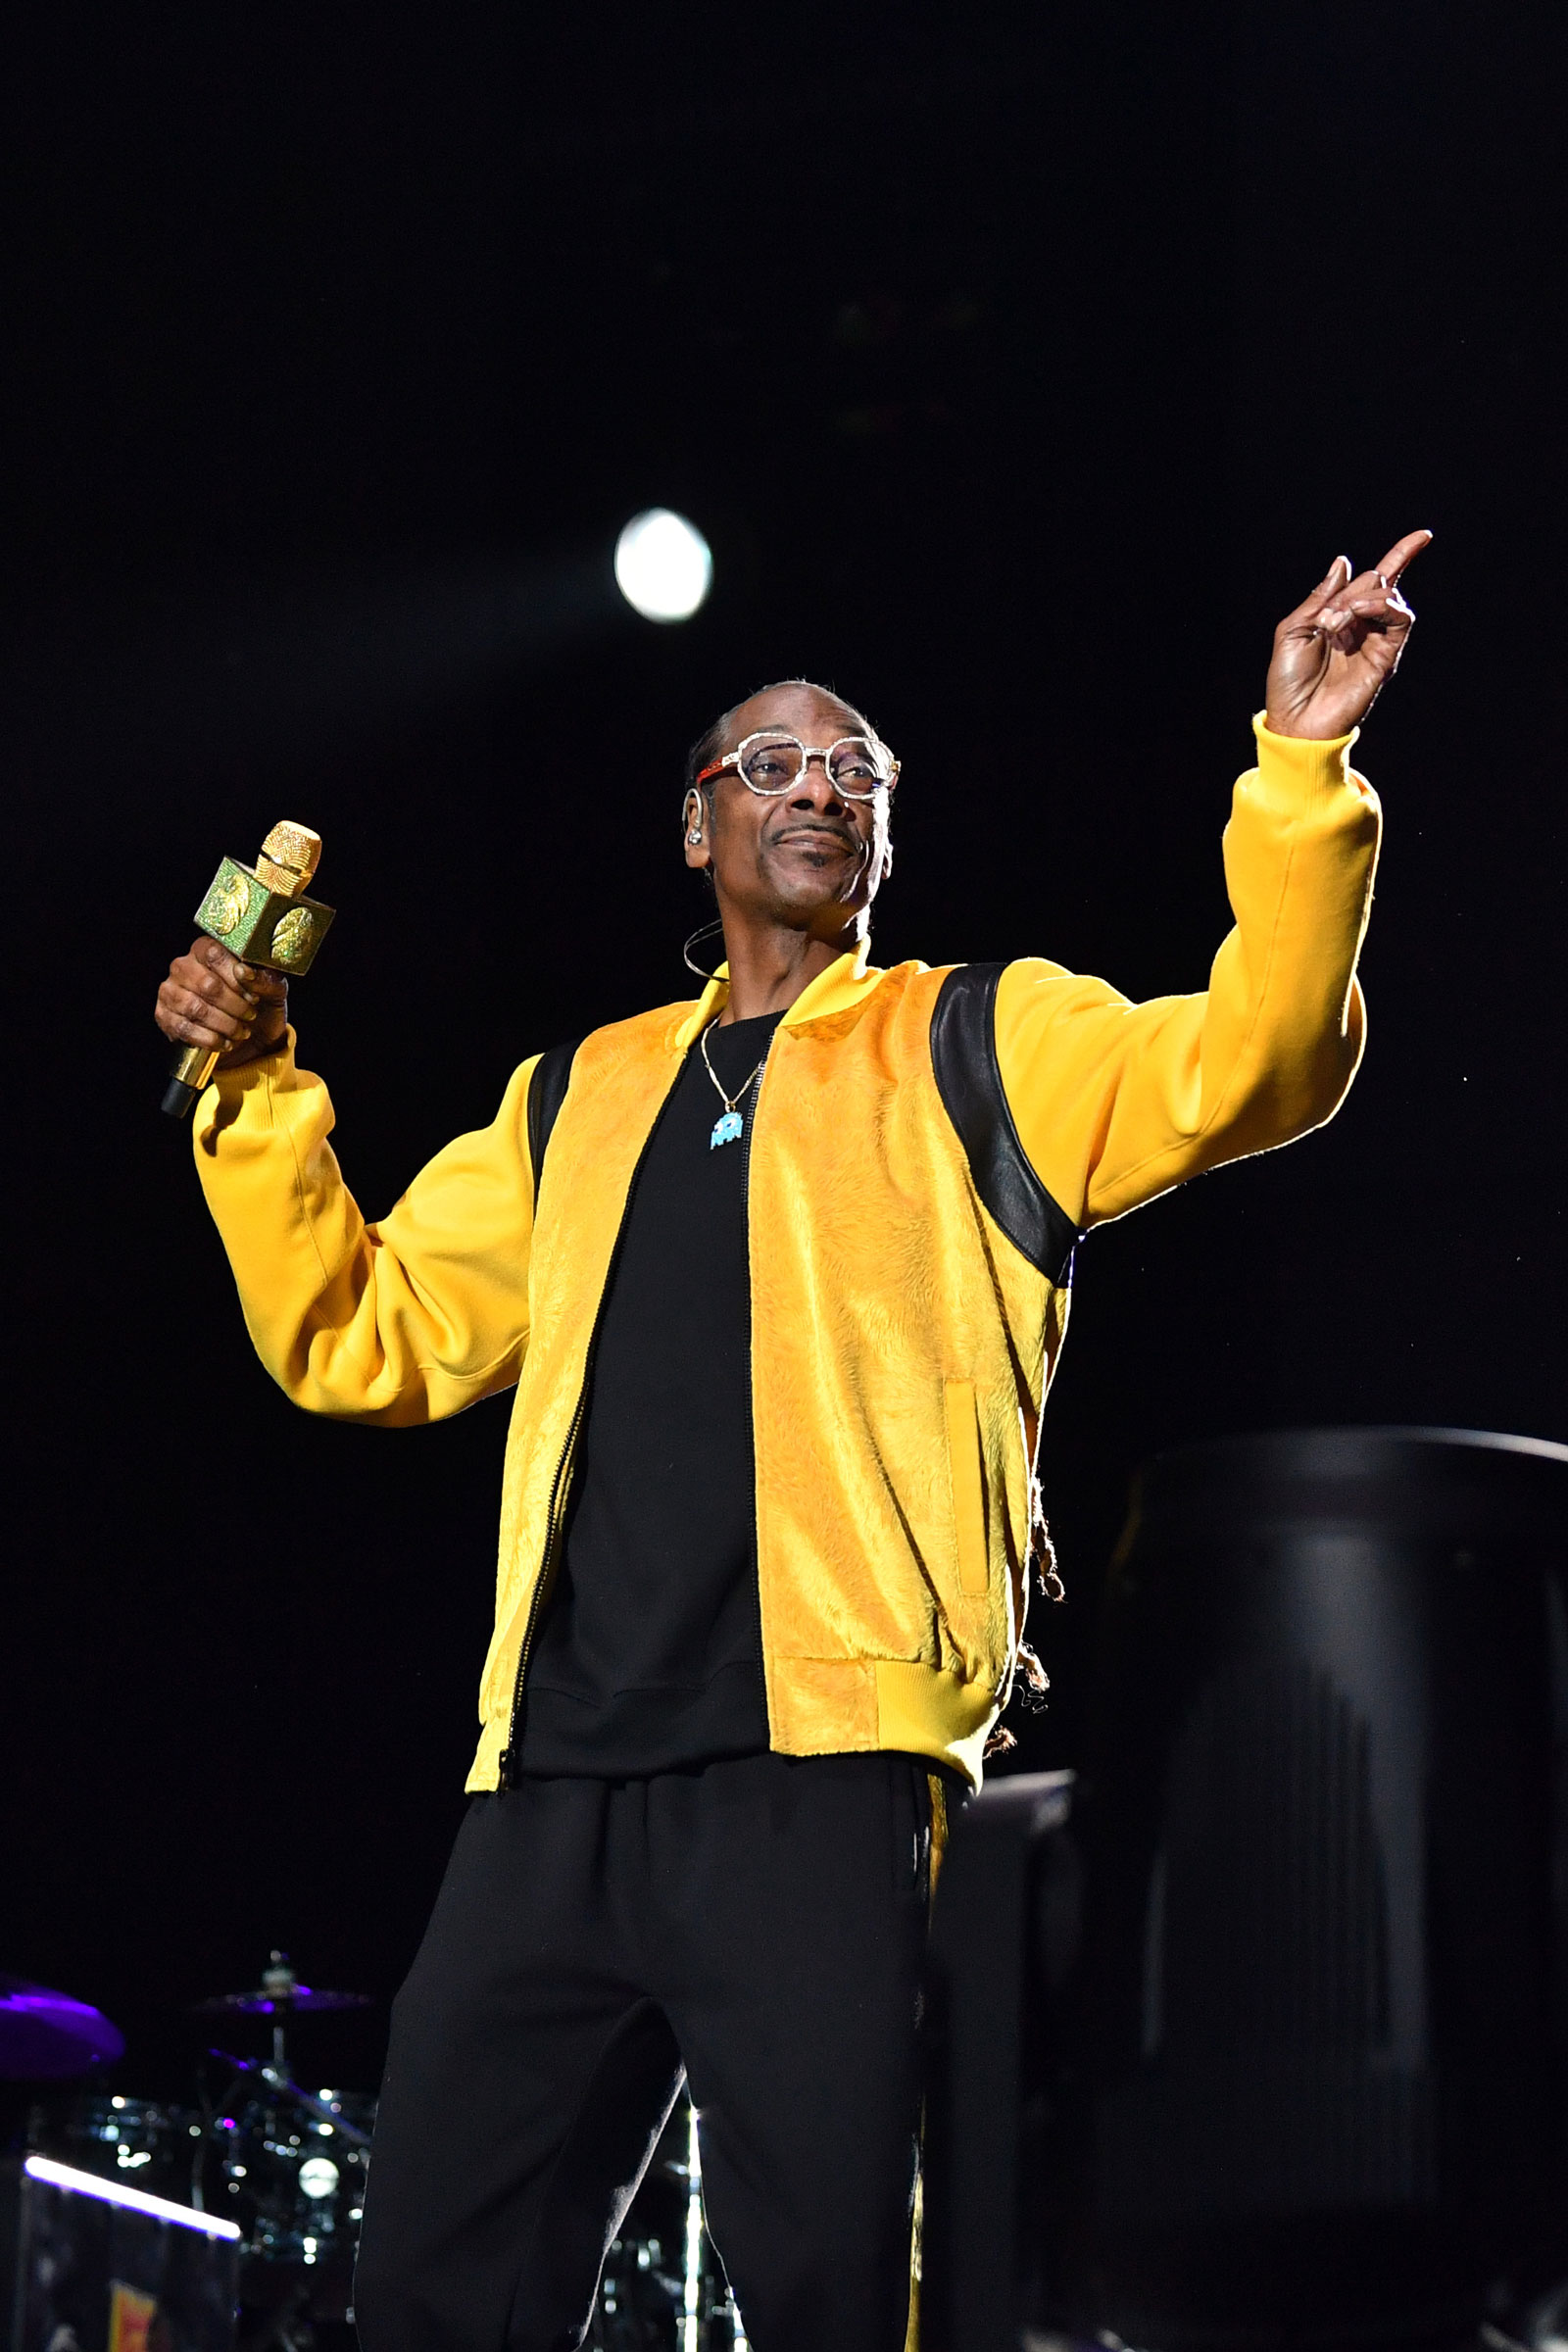 LOS ANGELES, CALIFORNIA - DECEMBER 10: Snoop Dogg performs at the 2022 LA3C Festival at Los Angeles State Historic Park on December 10, 2022 in Los Angeles, California. (Photo by Sarah Morris/Getty Images) (Getty Images—2022 Sarah Morris)